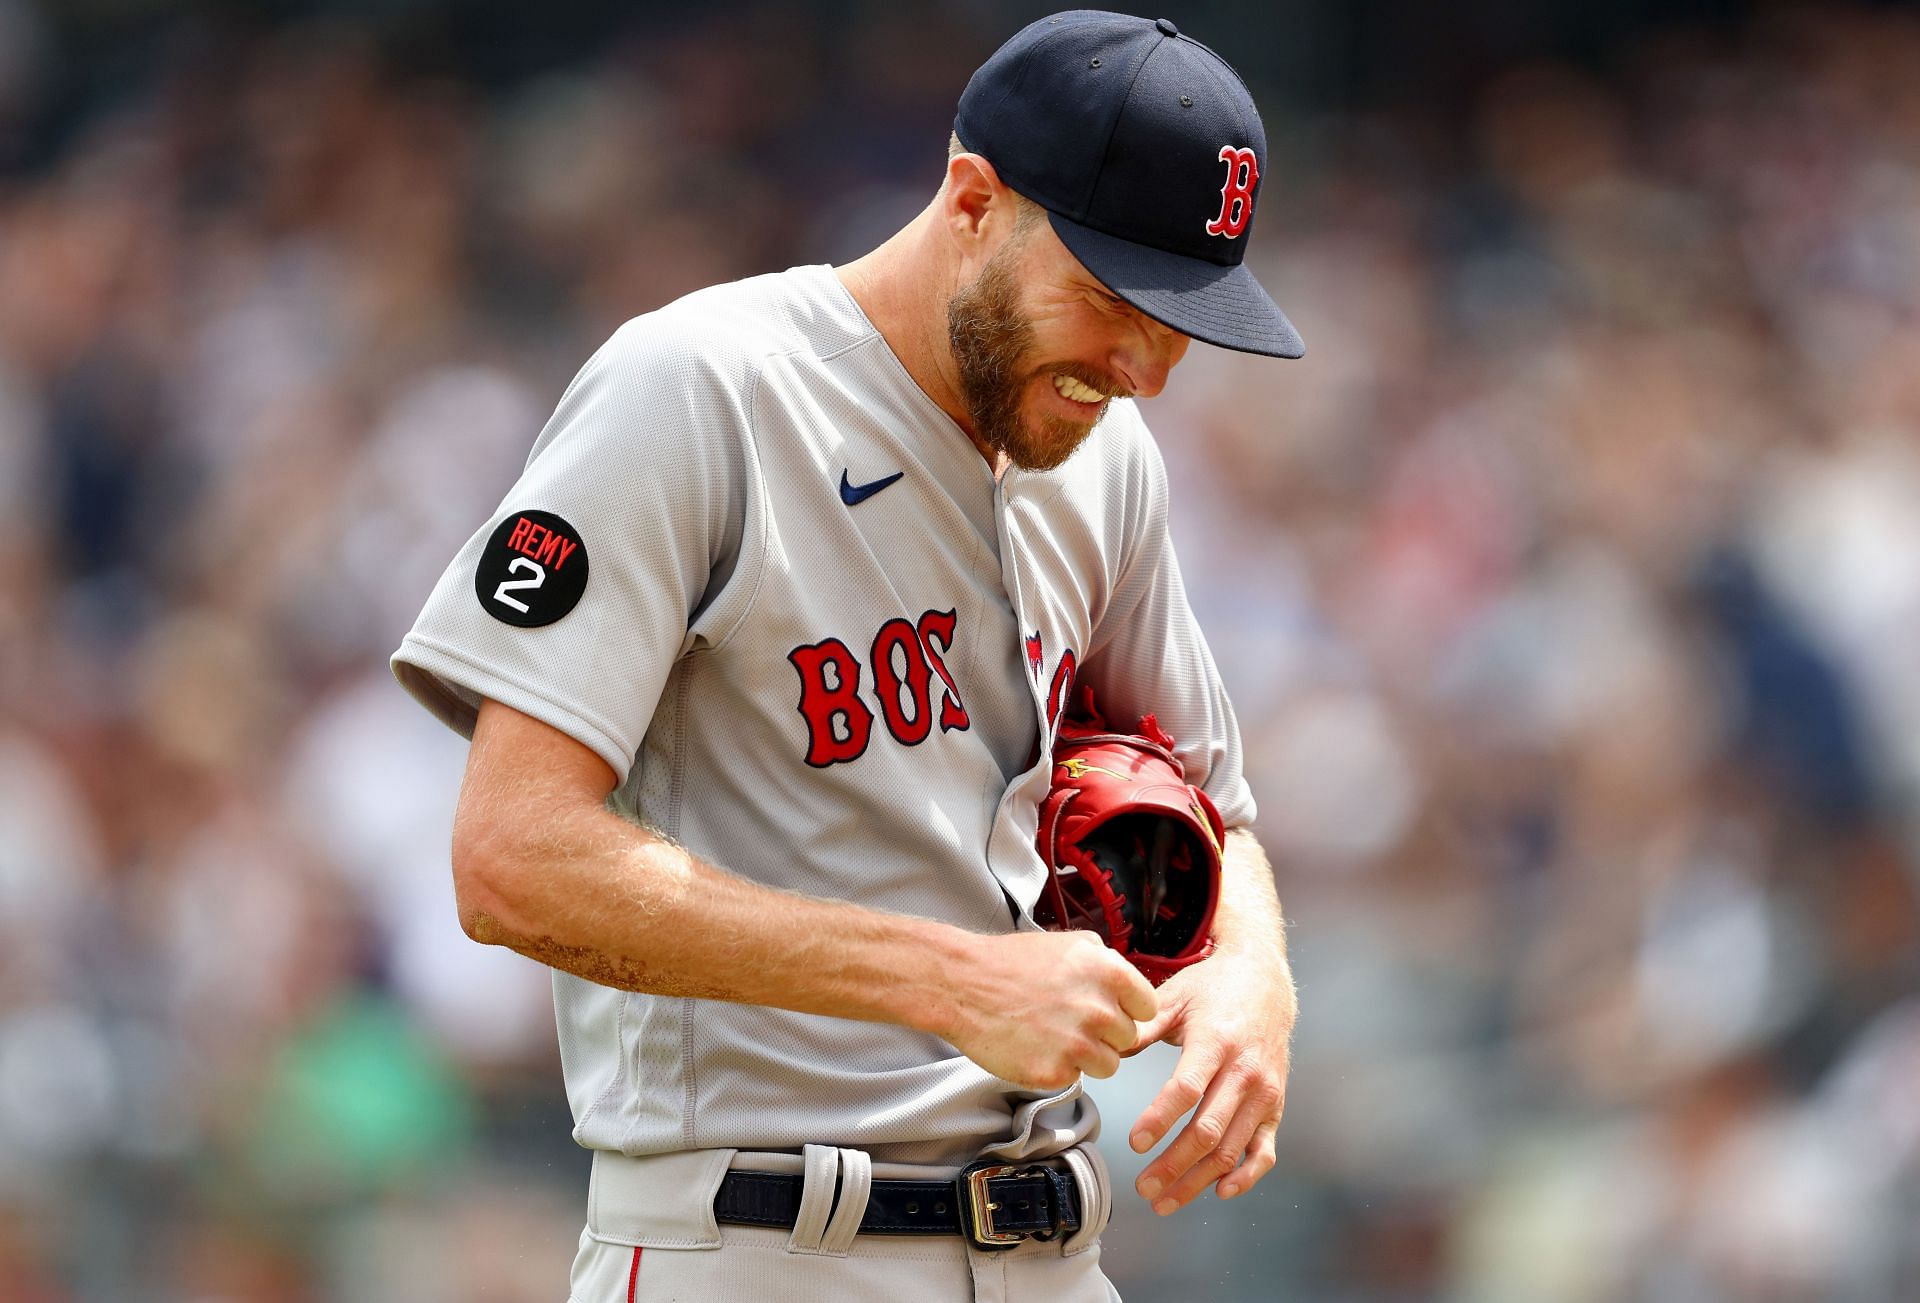 Boston Red Sox pitcher leaves game after being hit by line drive. 